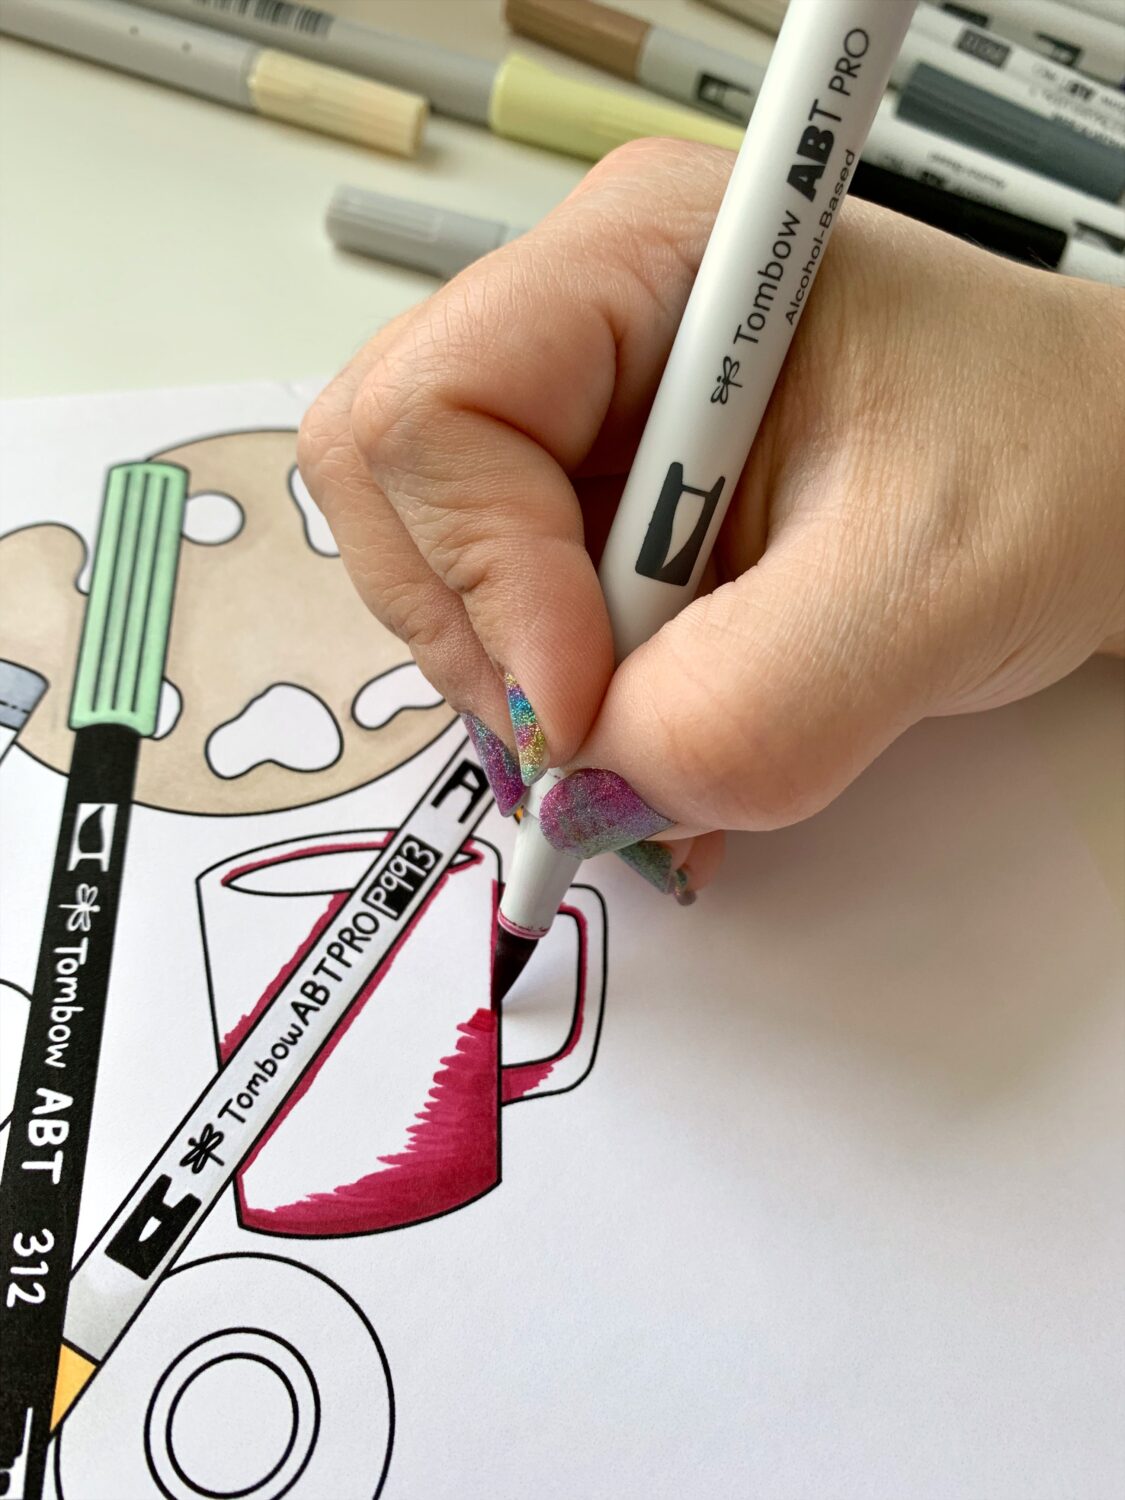 Free Adult Coloring Page Downloads! - Tombow USA Blog